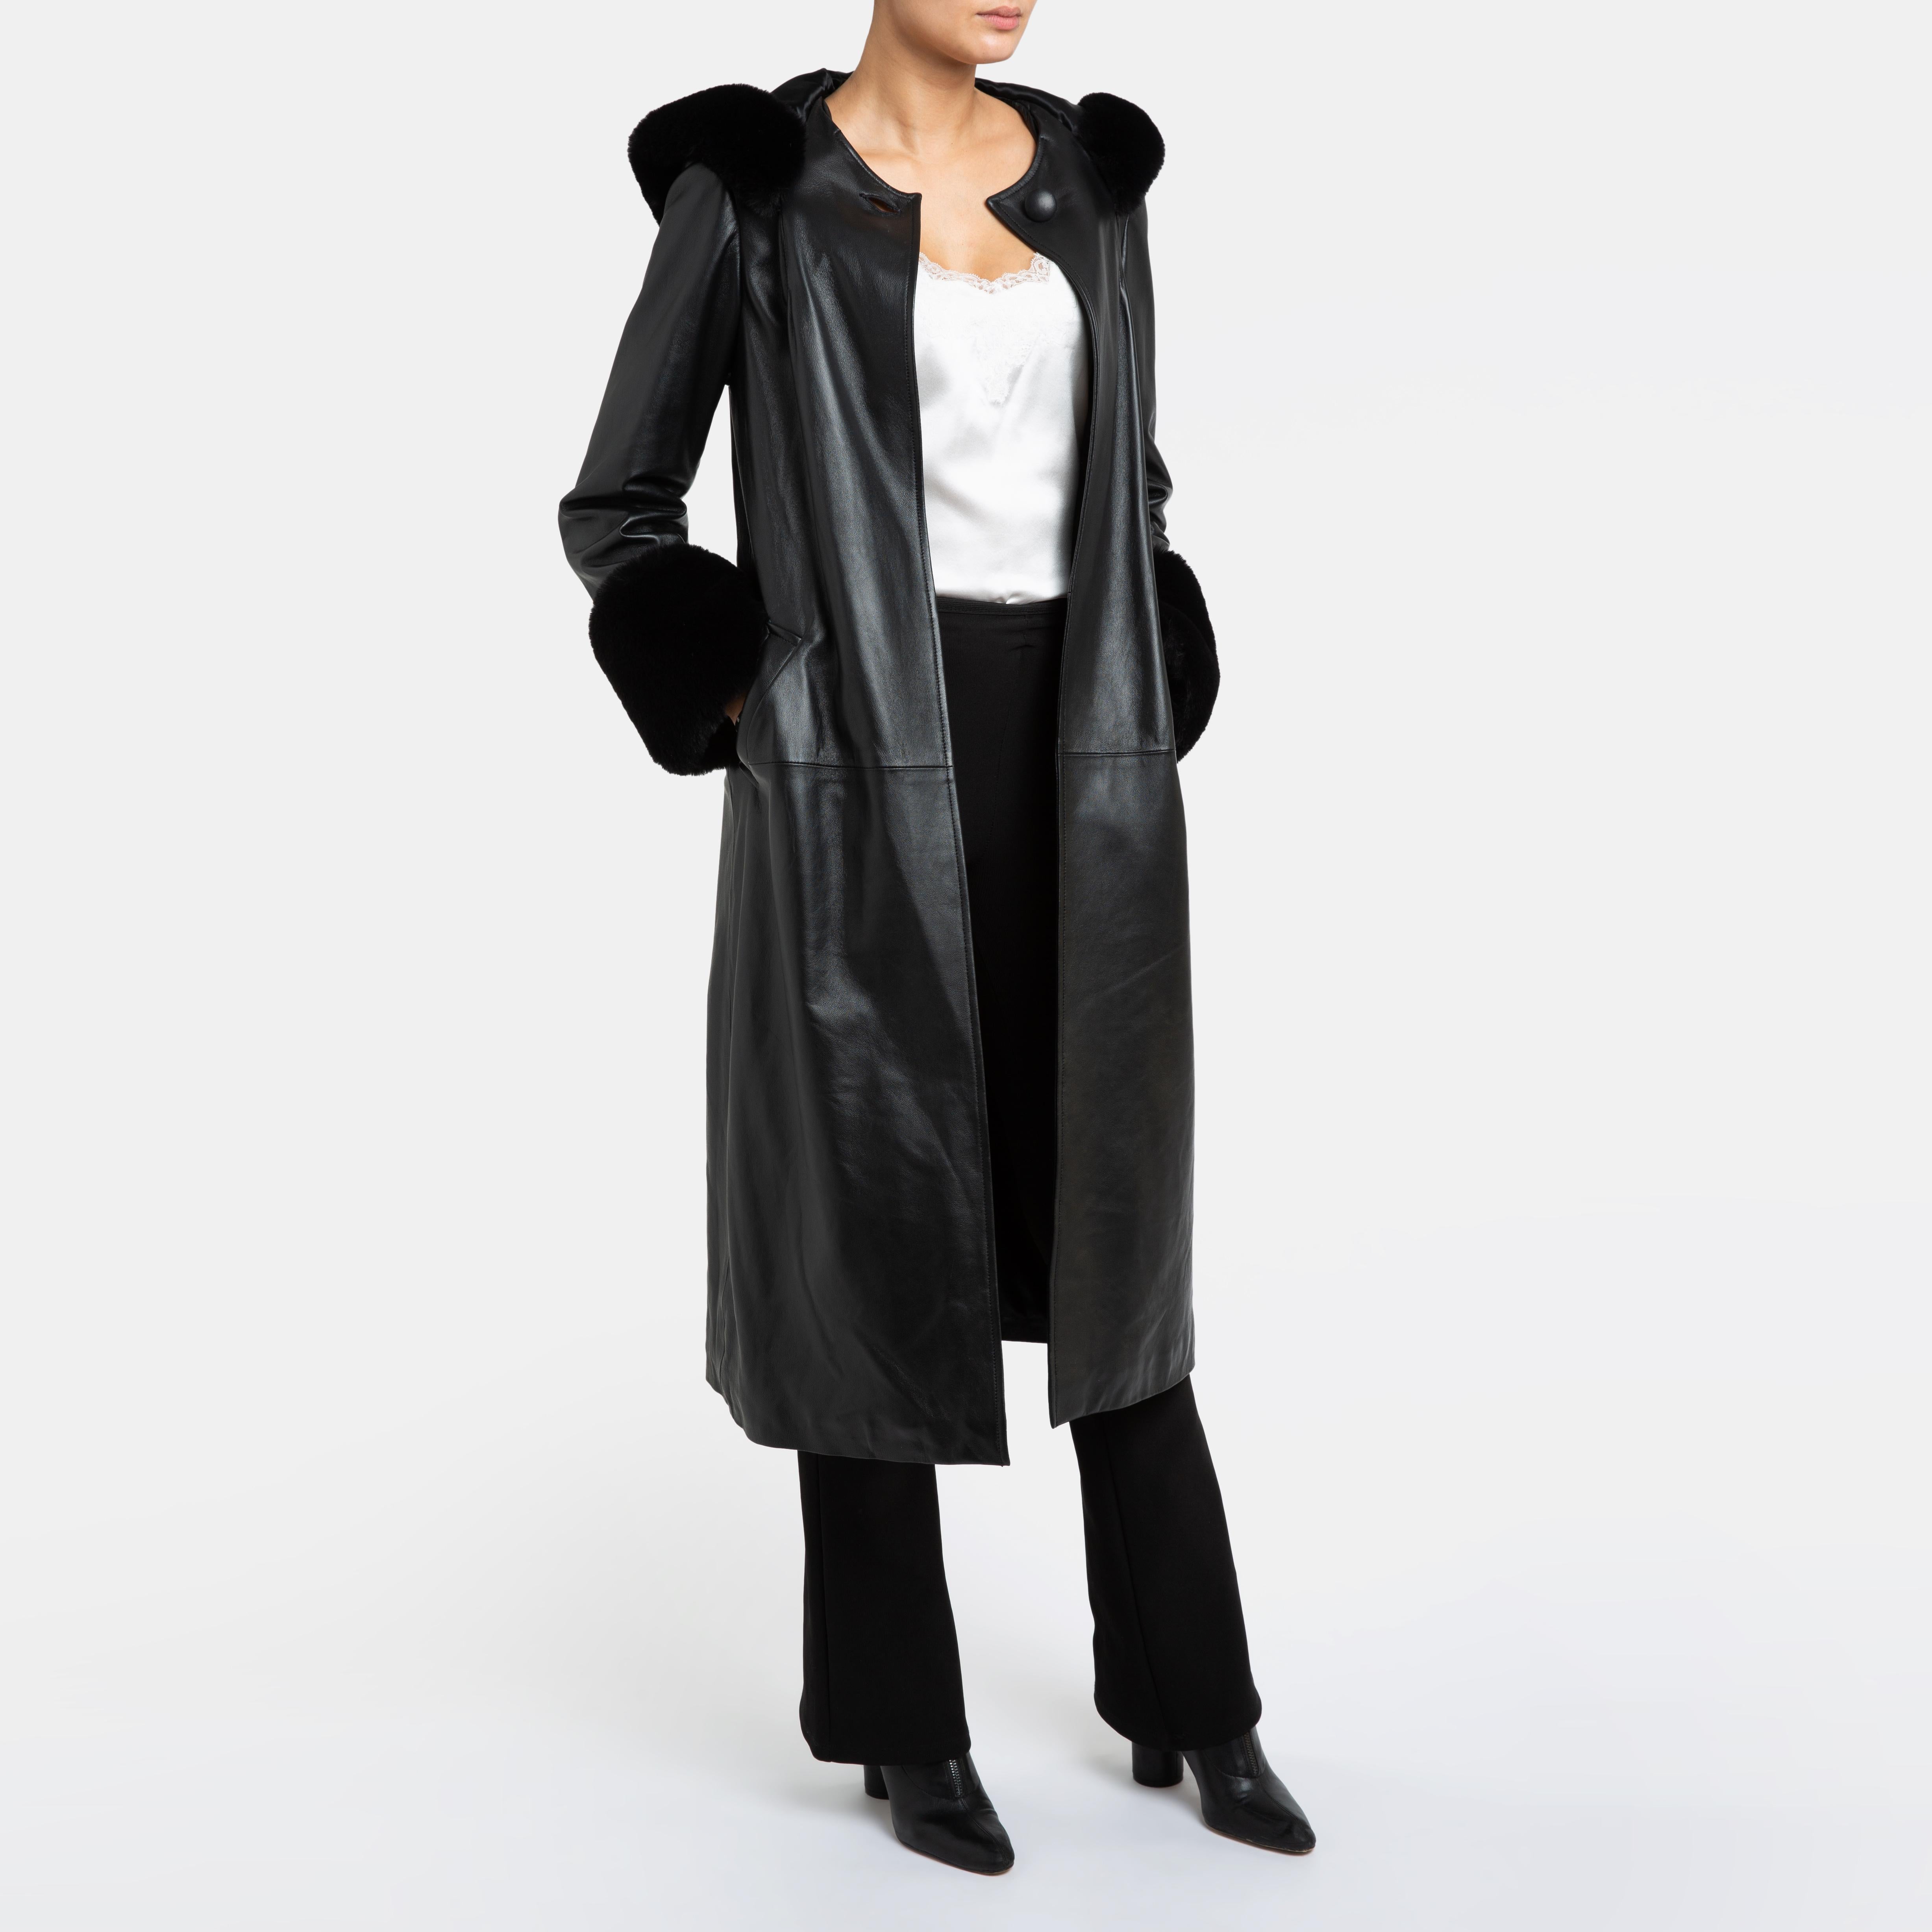 Verheyen London Hooded Leather Trench Coat in Black with Faux Fur - Size uk 14  For Sale 7